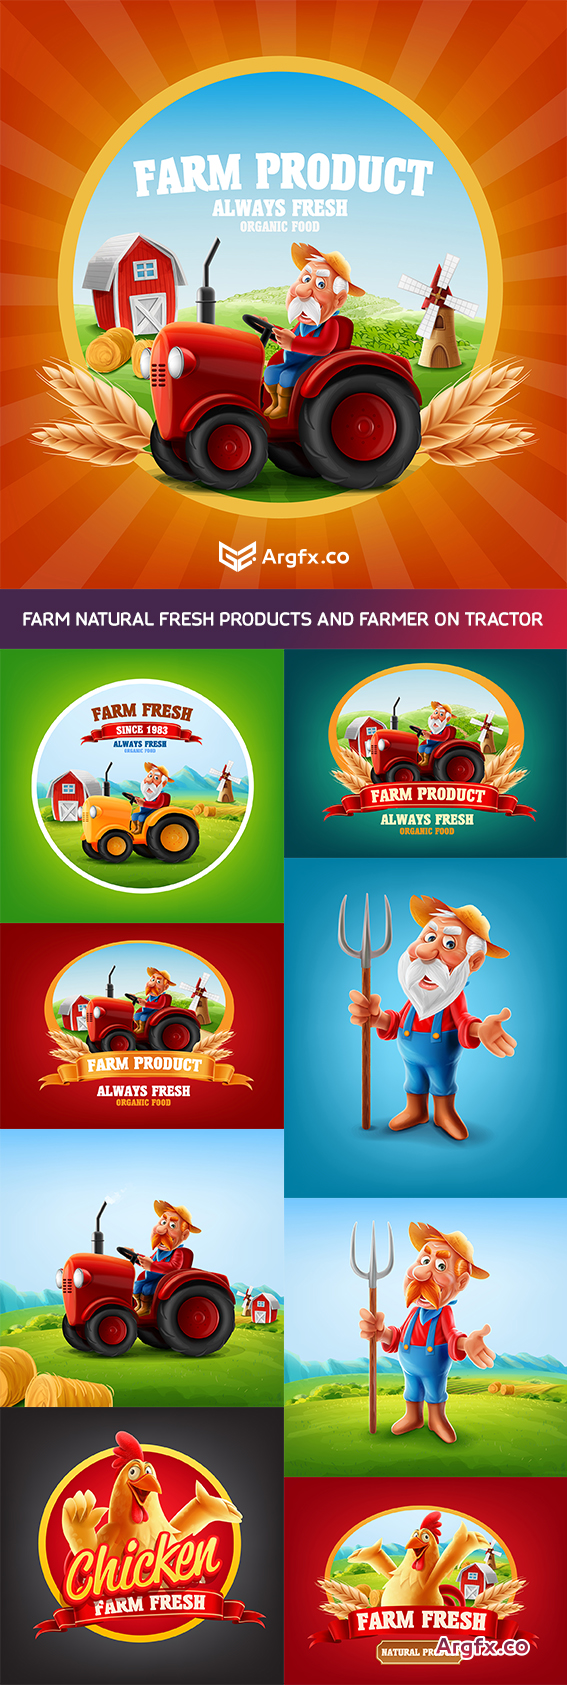  Farm natural fresh products and farmer on tractor